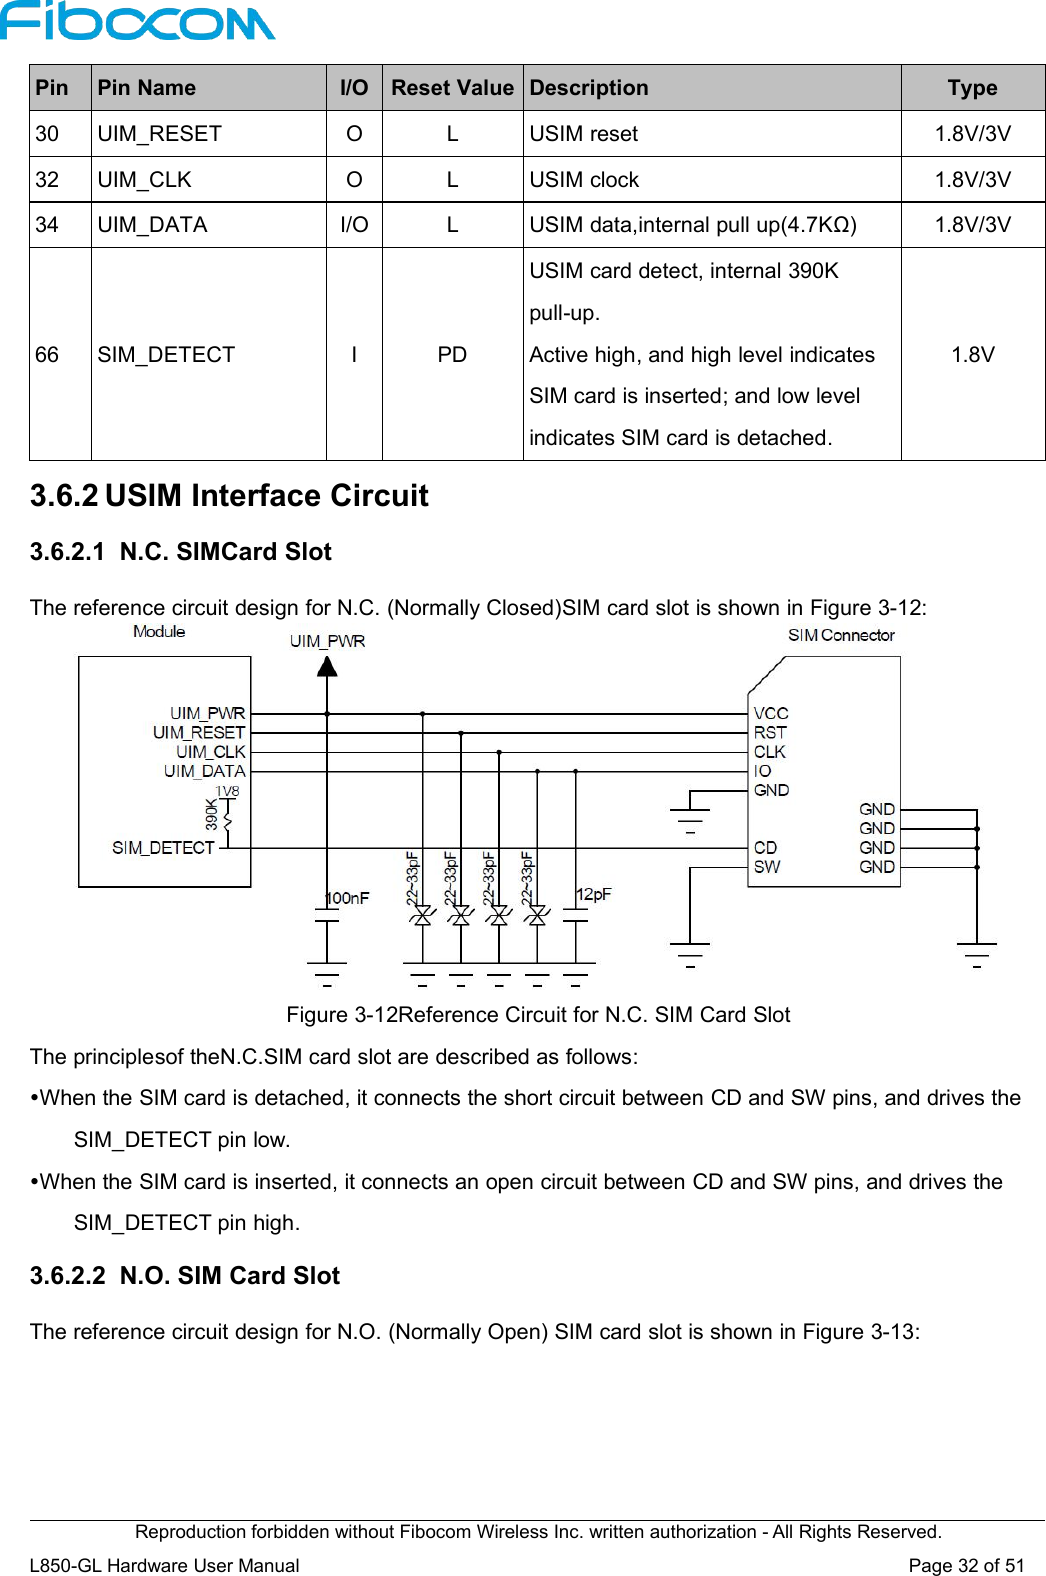 Reproduction forbidden without Fibocom Wireless Inc. written authorization - All Rights Reserved.L850-GL Hardware User Manual Page32of51PinPin NameI/OReset ValueDescriptionType30UIM_RESETOLUSIM reset1.8V/3V32UIM_CLKOLUSIM clock1.8V/3V34UIM_DATAI/OLUSIM data,internal pull up(4.7KΩ)1.8V/3V66SIM_DETECTIPDUSIM card detect, internal 390Kpull-up.Active high, and high level indicatesSIM card is inserted; and low levelindicates SIM card is detached.1.8V3.6.2 USIM Interface Circuit3.6.2.1 N.C. SIMCard SlotThe reference circuit design for N.C. (Normally Closed)SIM card slot is shown in Figure 3-12:Figure 3-12Reference Circuit for N.C. SIM Card SlotThe principlesof theN.C.SIM card slot are described as follows:When the SIM card is detached, it connects the short circuit between CD and SW pins, and drives theSIM_DETECT pin low.When the SIM card is inserted, it connects an open circuit between CD and SW pins, and drives theSIM_DETECT pin high.3.6.2.2 N.O. SIM Card SlotThe reference circuit design for N.O. (Normally Open) SIM card slot is shown in Figure 3-13: